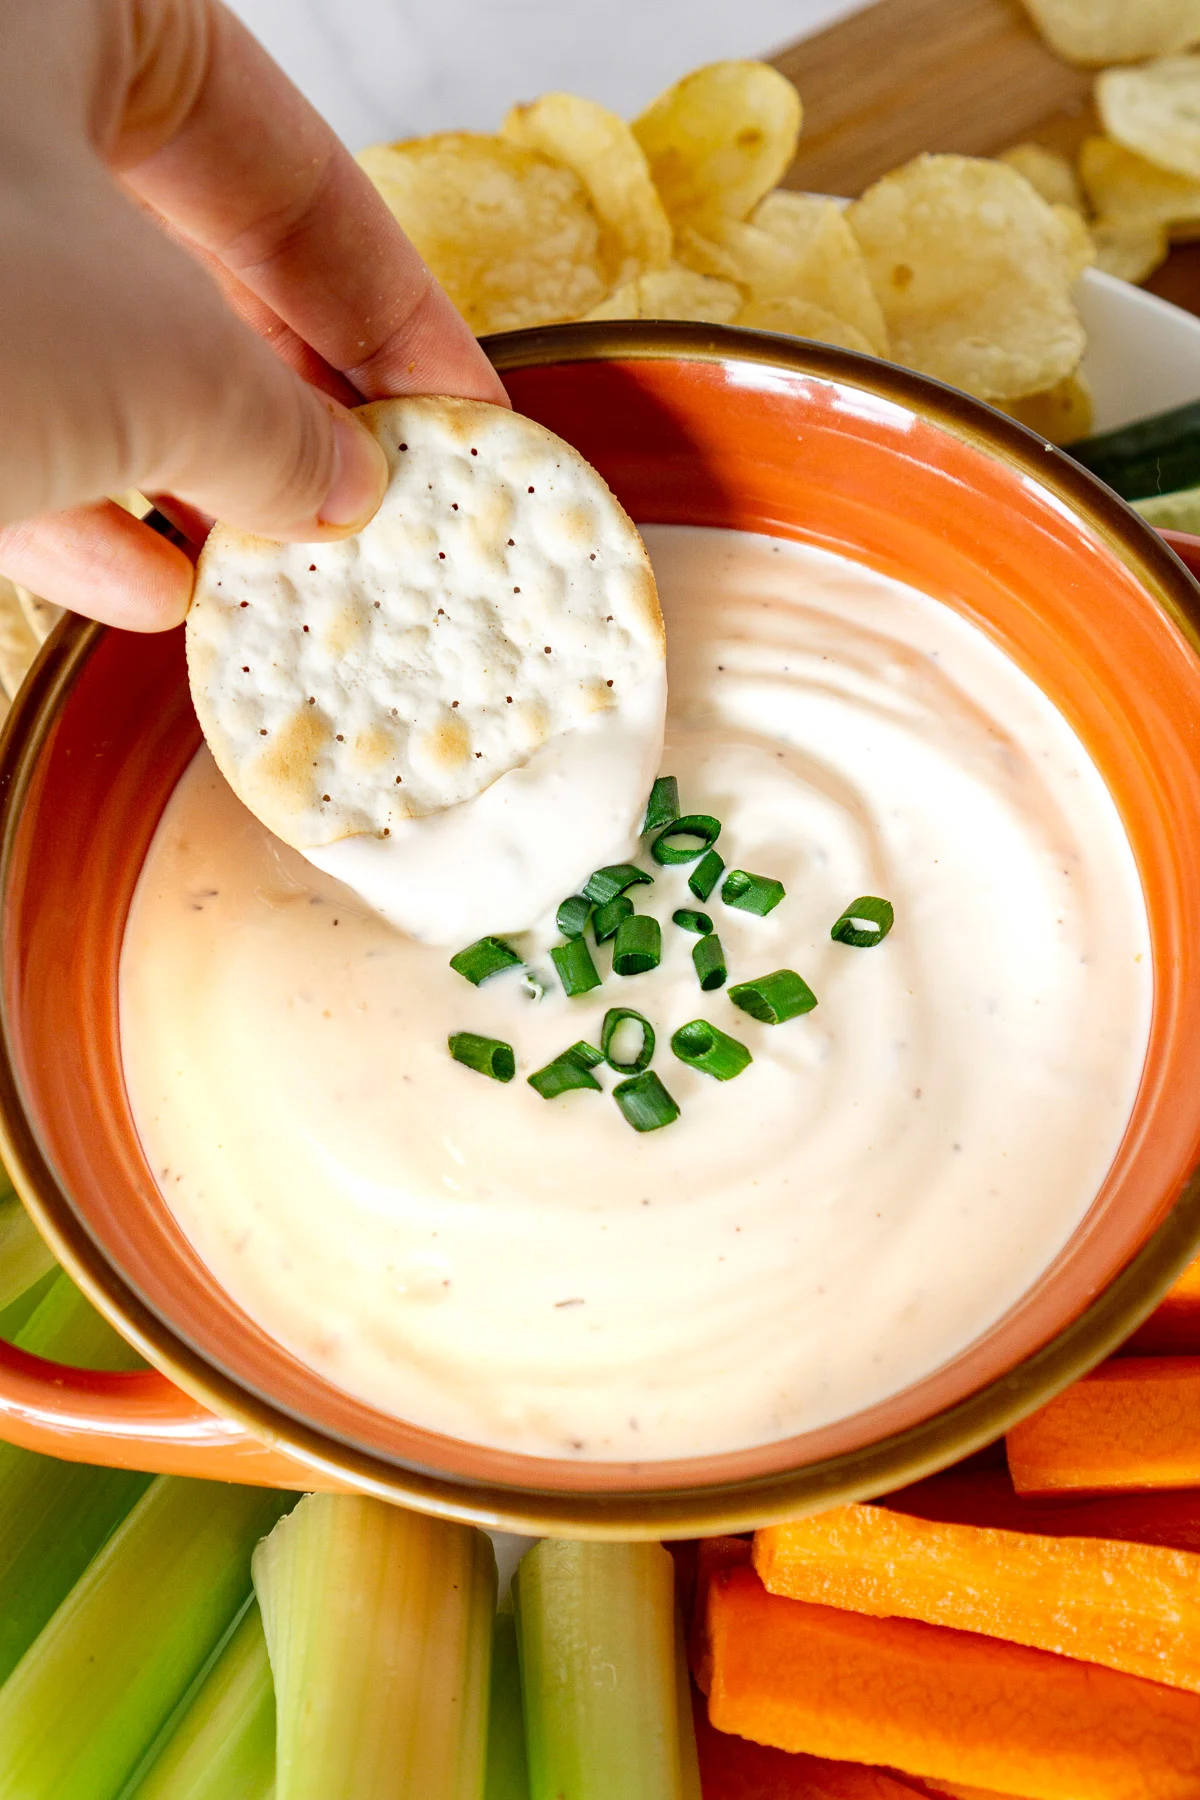 hand dipping cracker into a creamy dip with veggies on the side